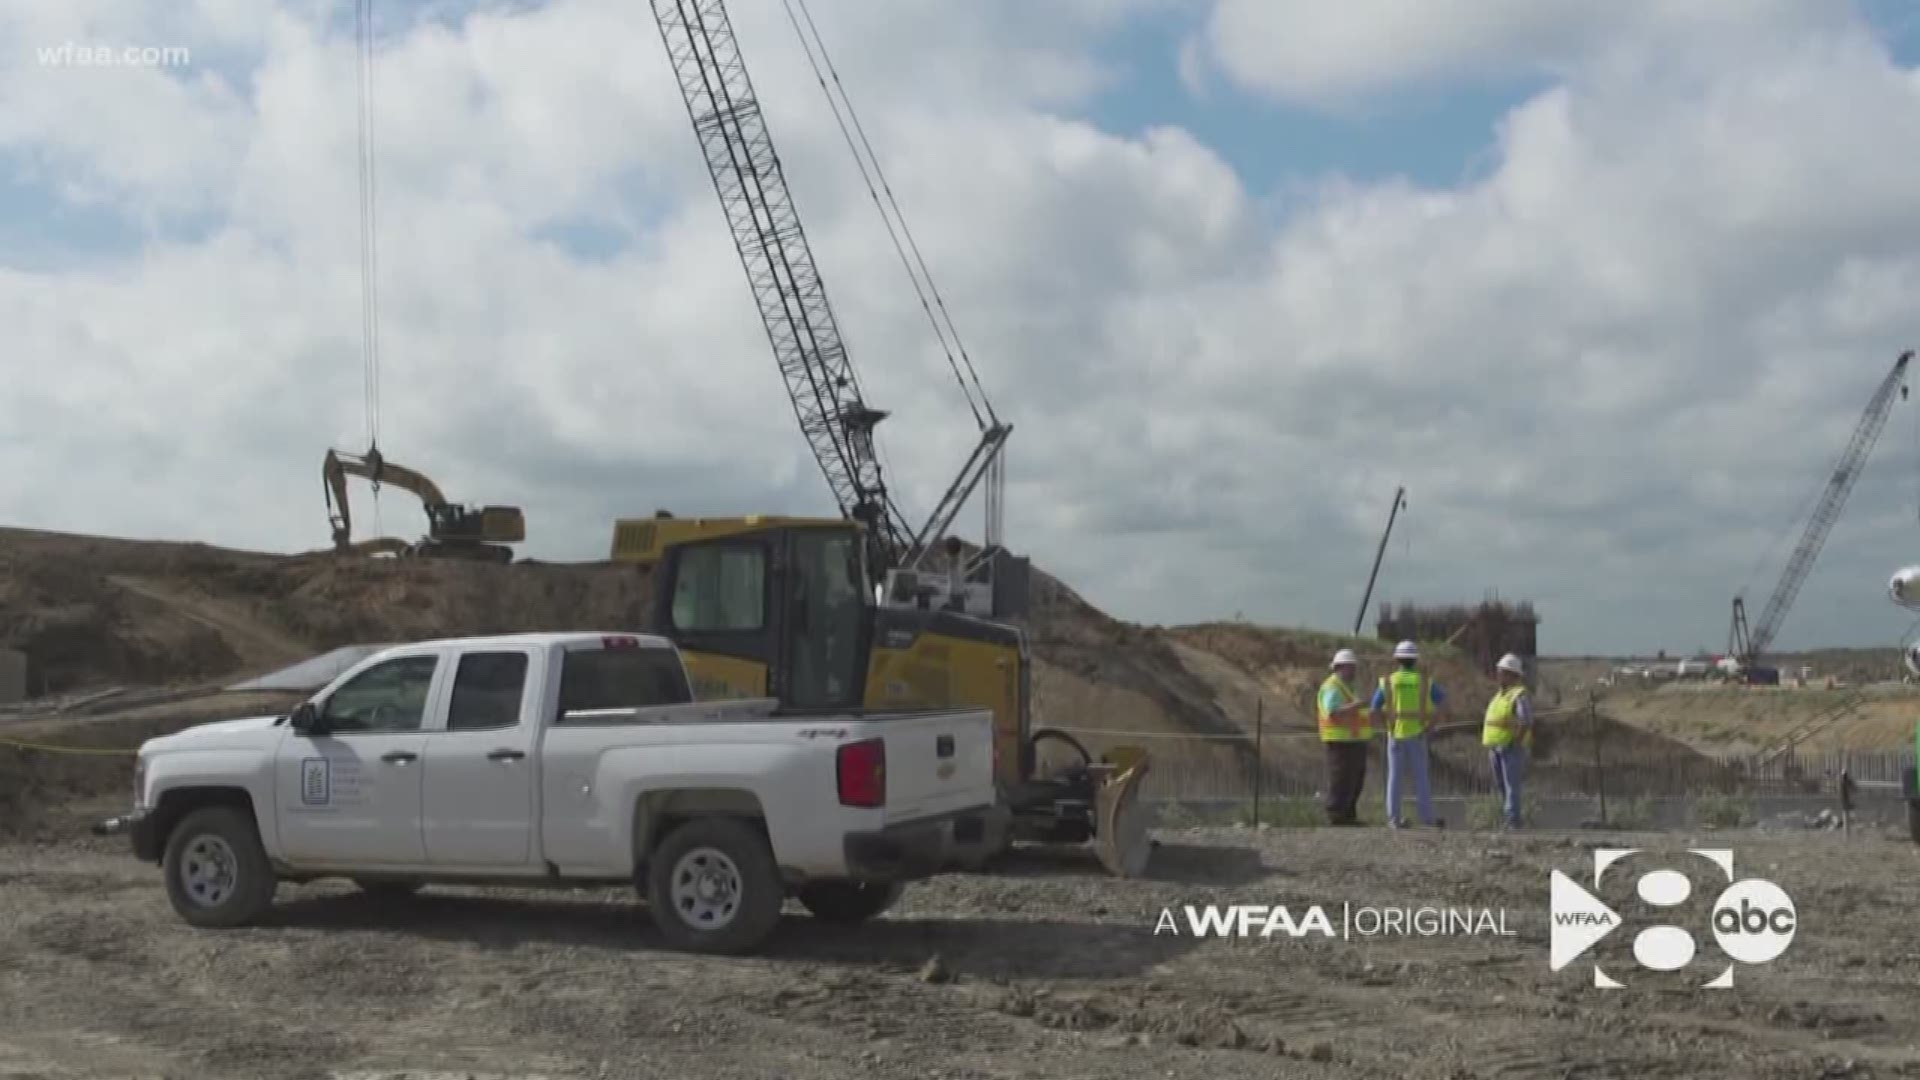 The solution to one of Texas' biggest problems could be found in Bonham.